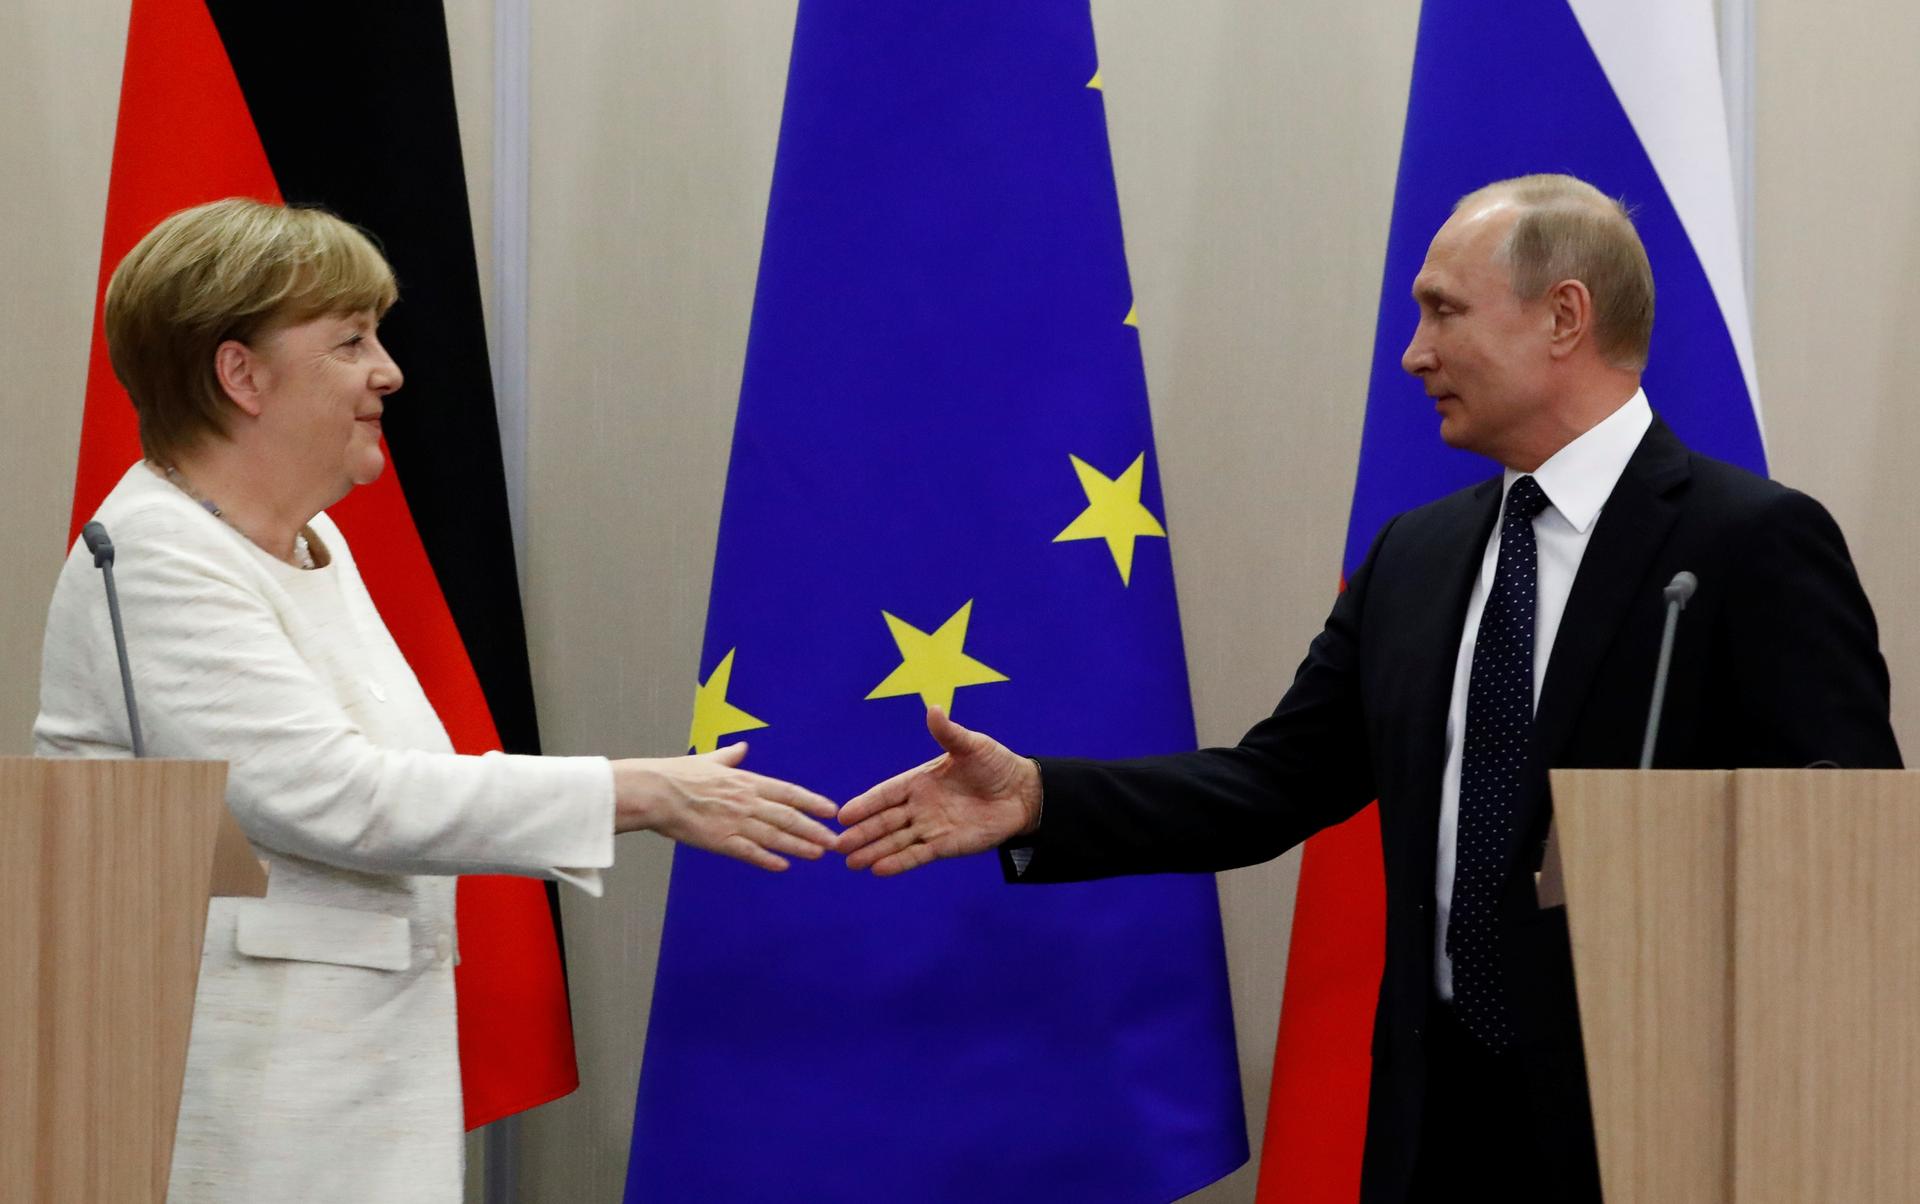 Russian President Vladimir Putin and German Chancellor Angela Merkel shake hands following a joint news conference in the Black Sea resort of Sochi, Russia, May 18, 2018.